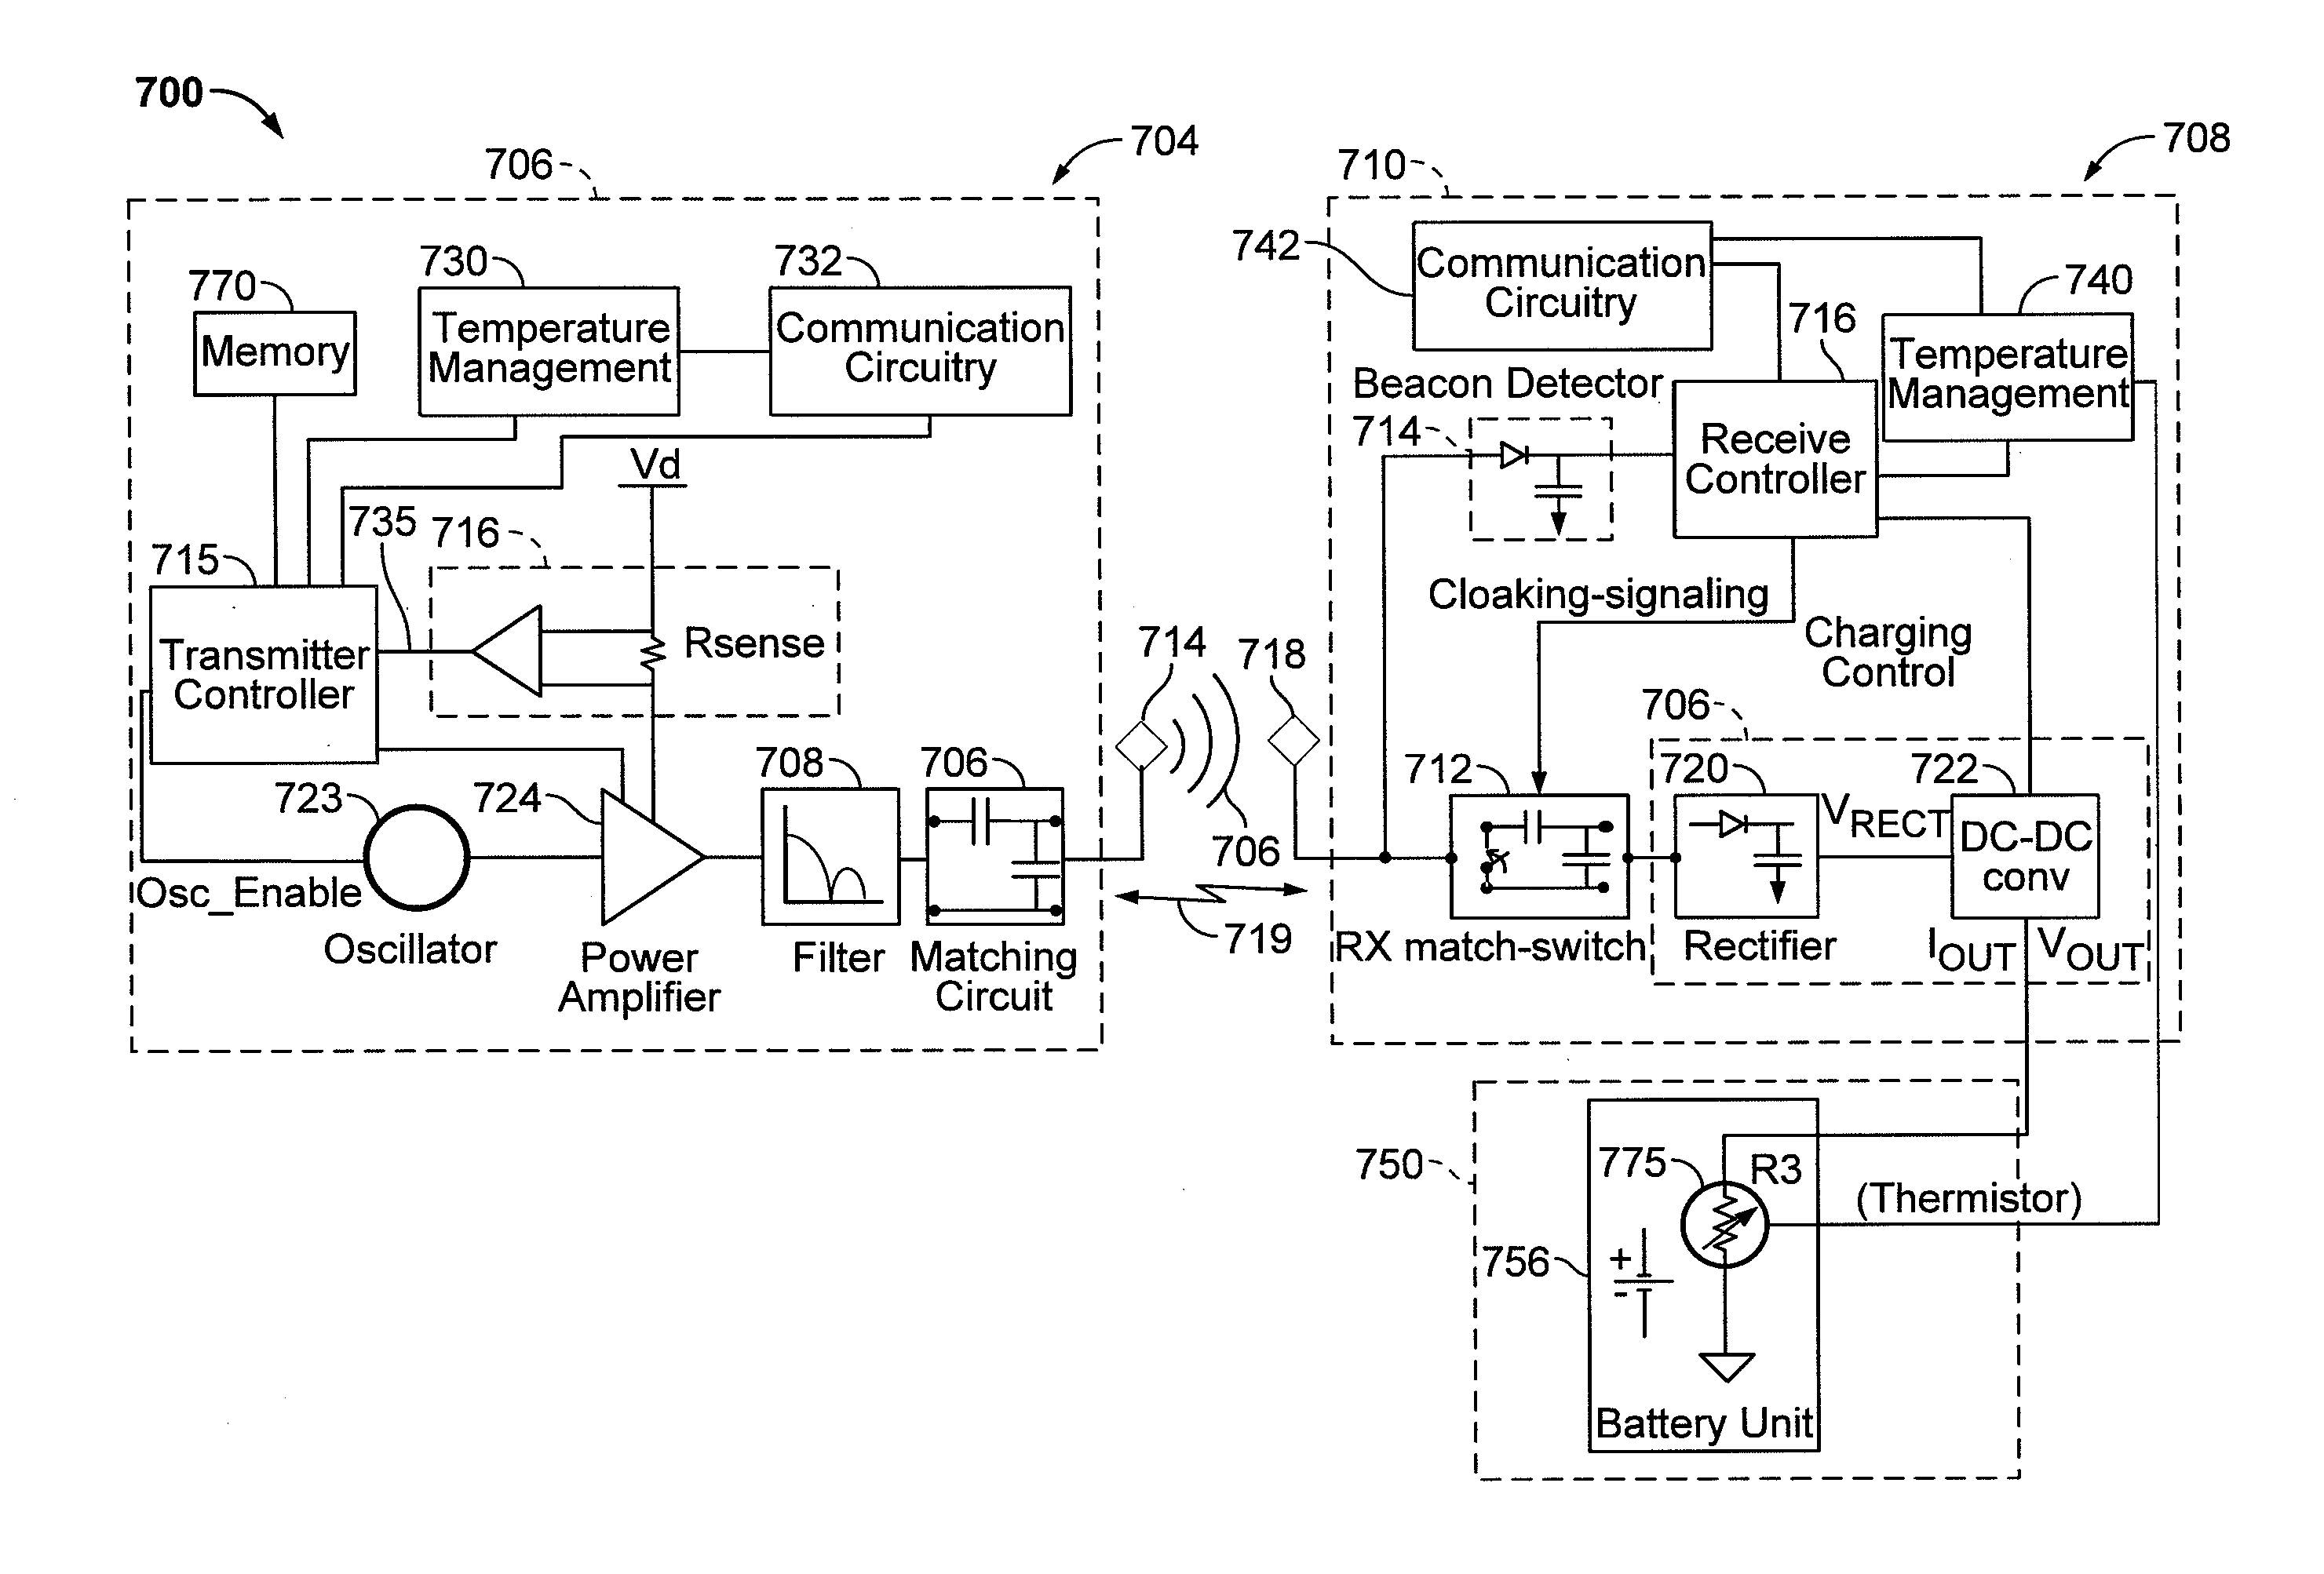 Reducing heat dissipation in a wireless power receiver